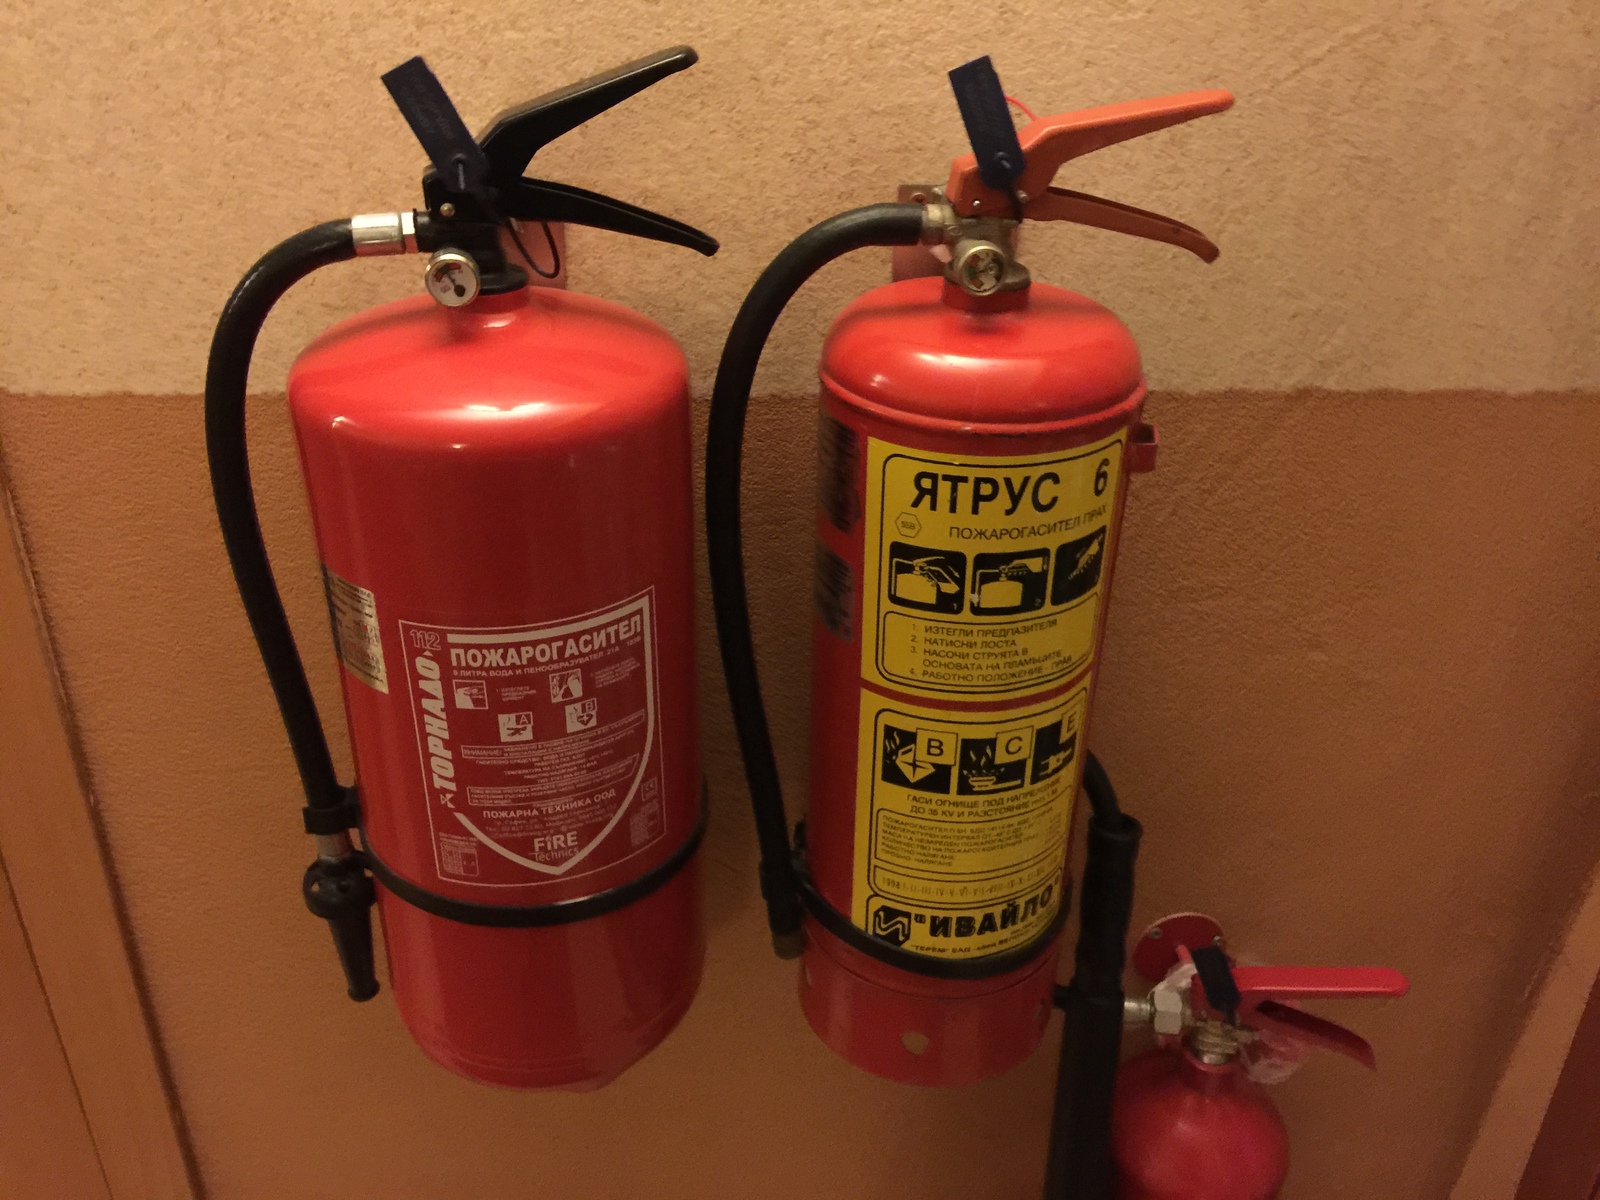 Insecure fire extinguisher. - My, The photo, Fire extinguisher